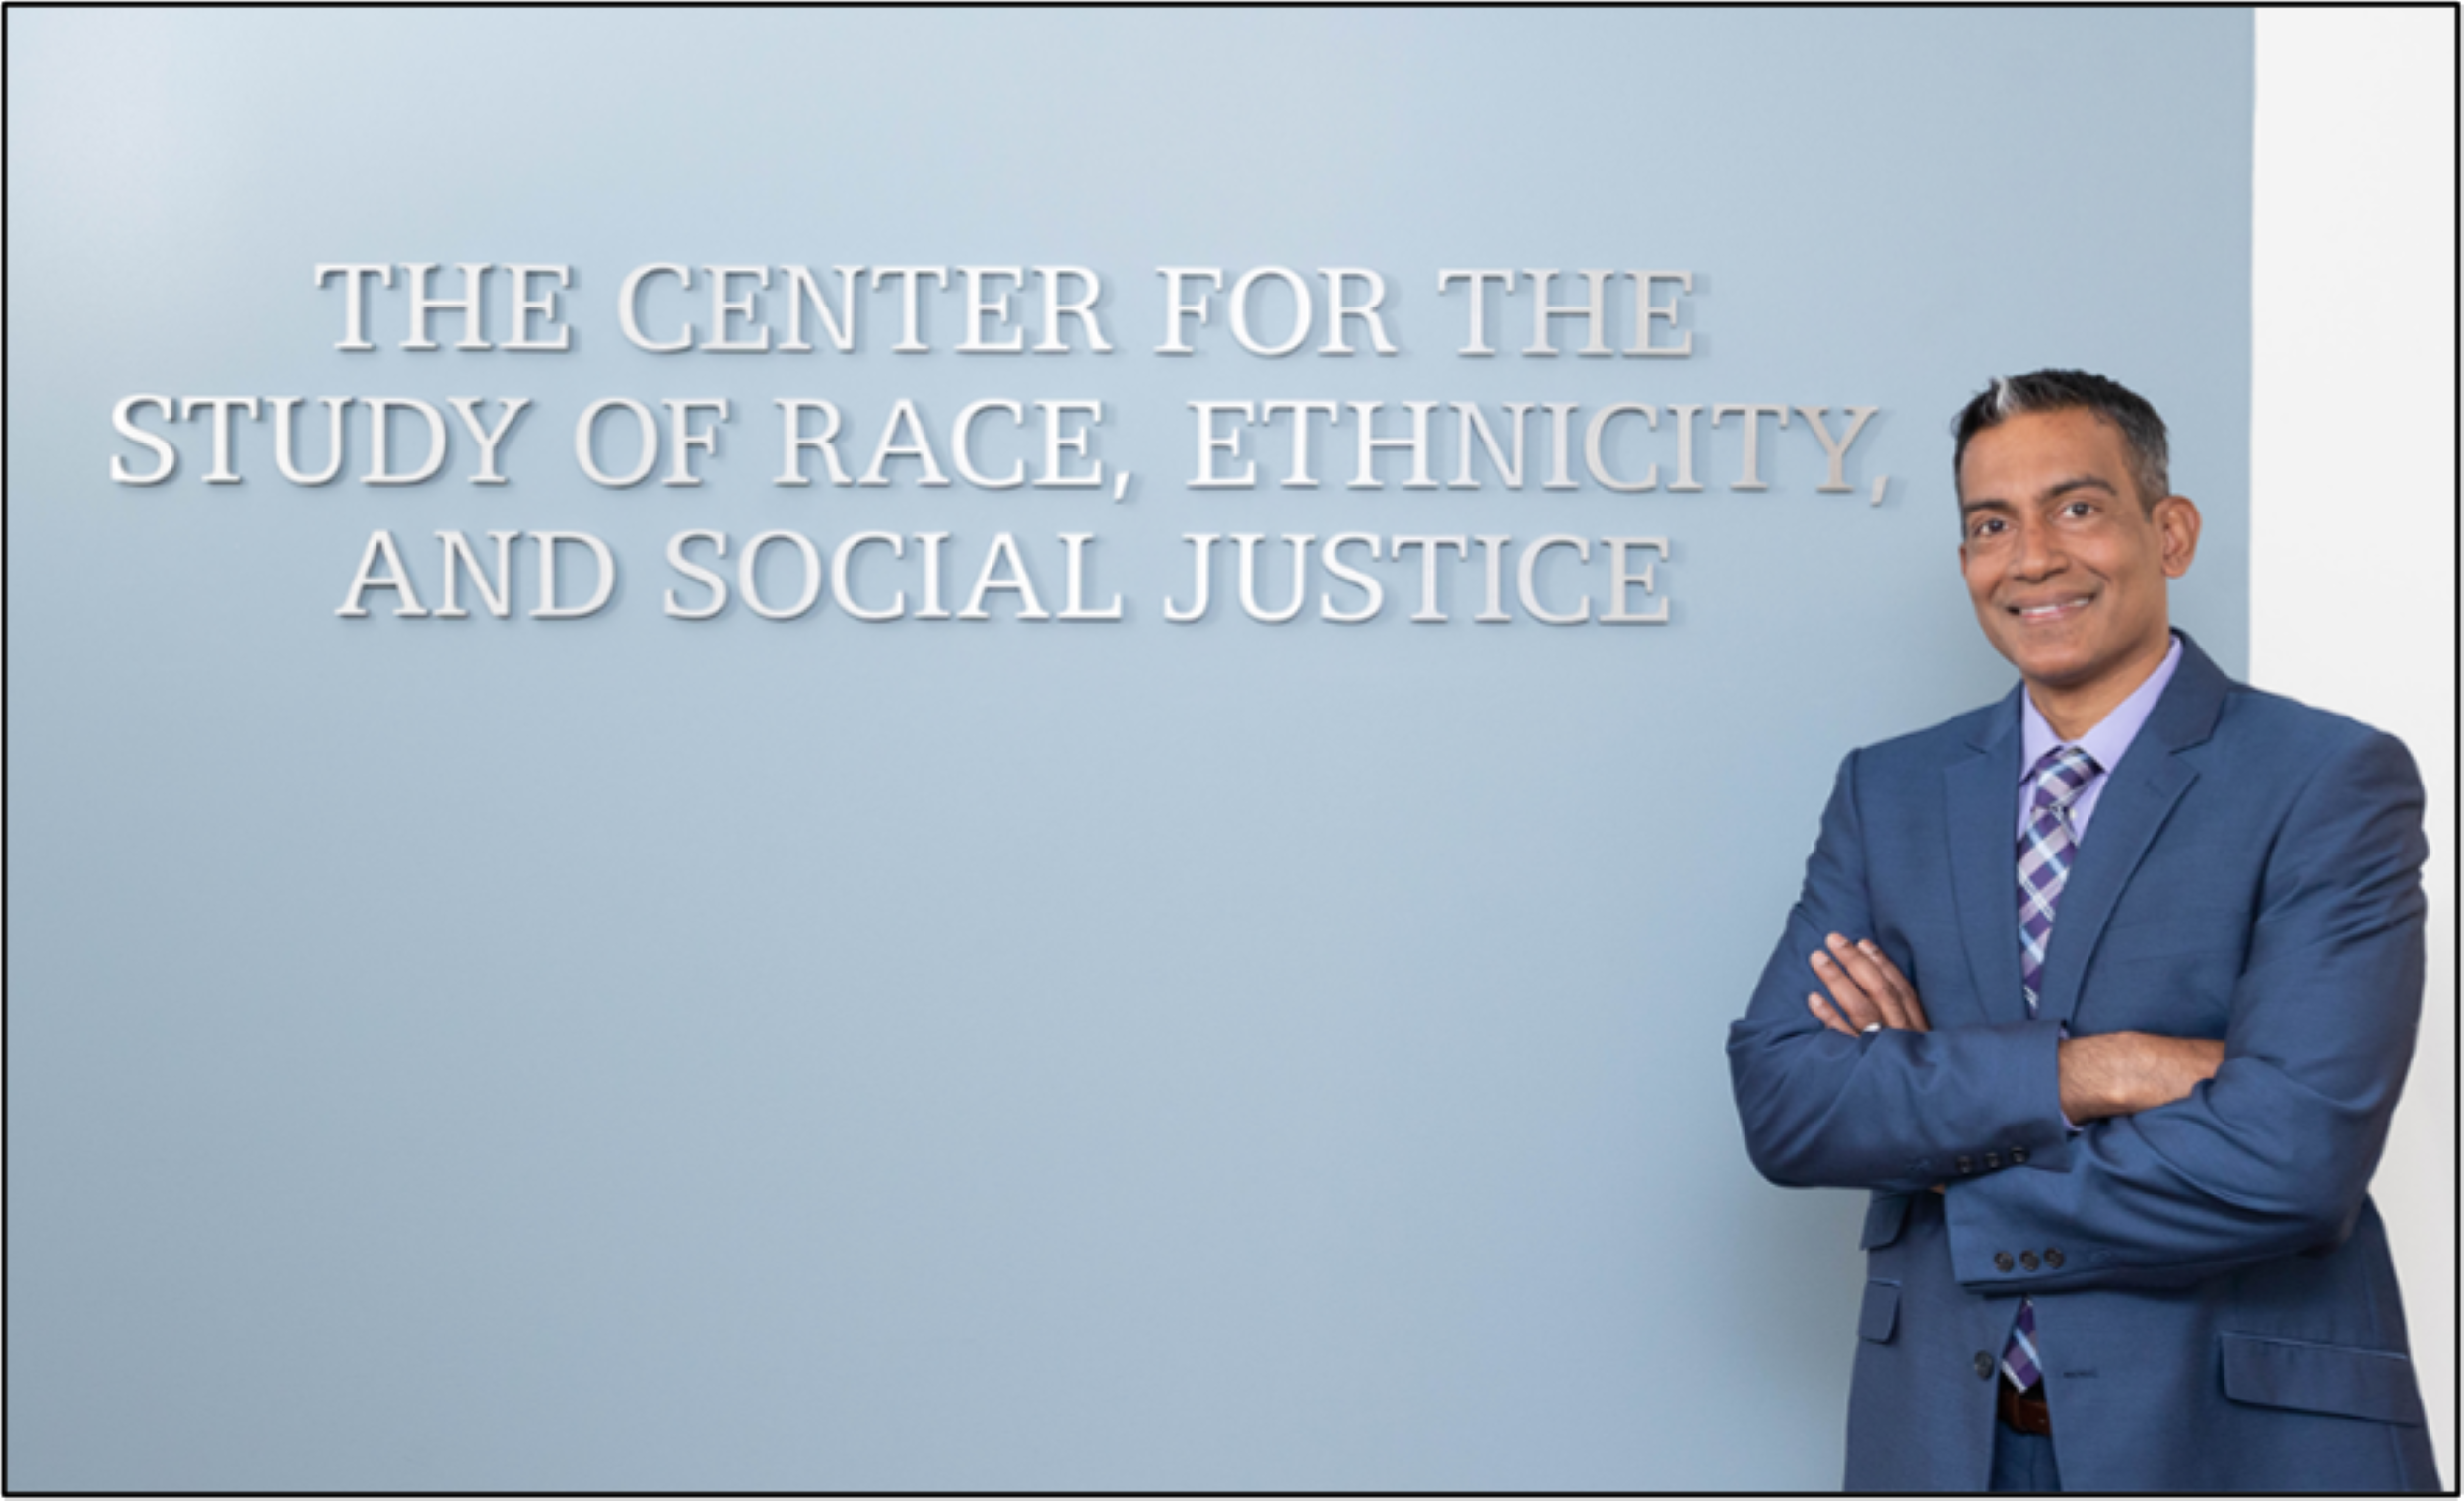 Dr. Stanley Thangaraj, James E. Hayden Chair for the Study of Race, Ethnicity, and Social Justice